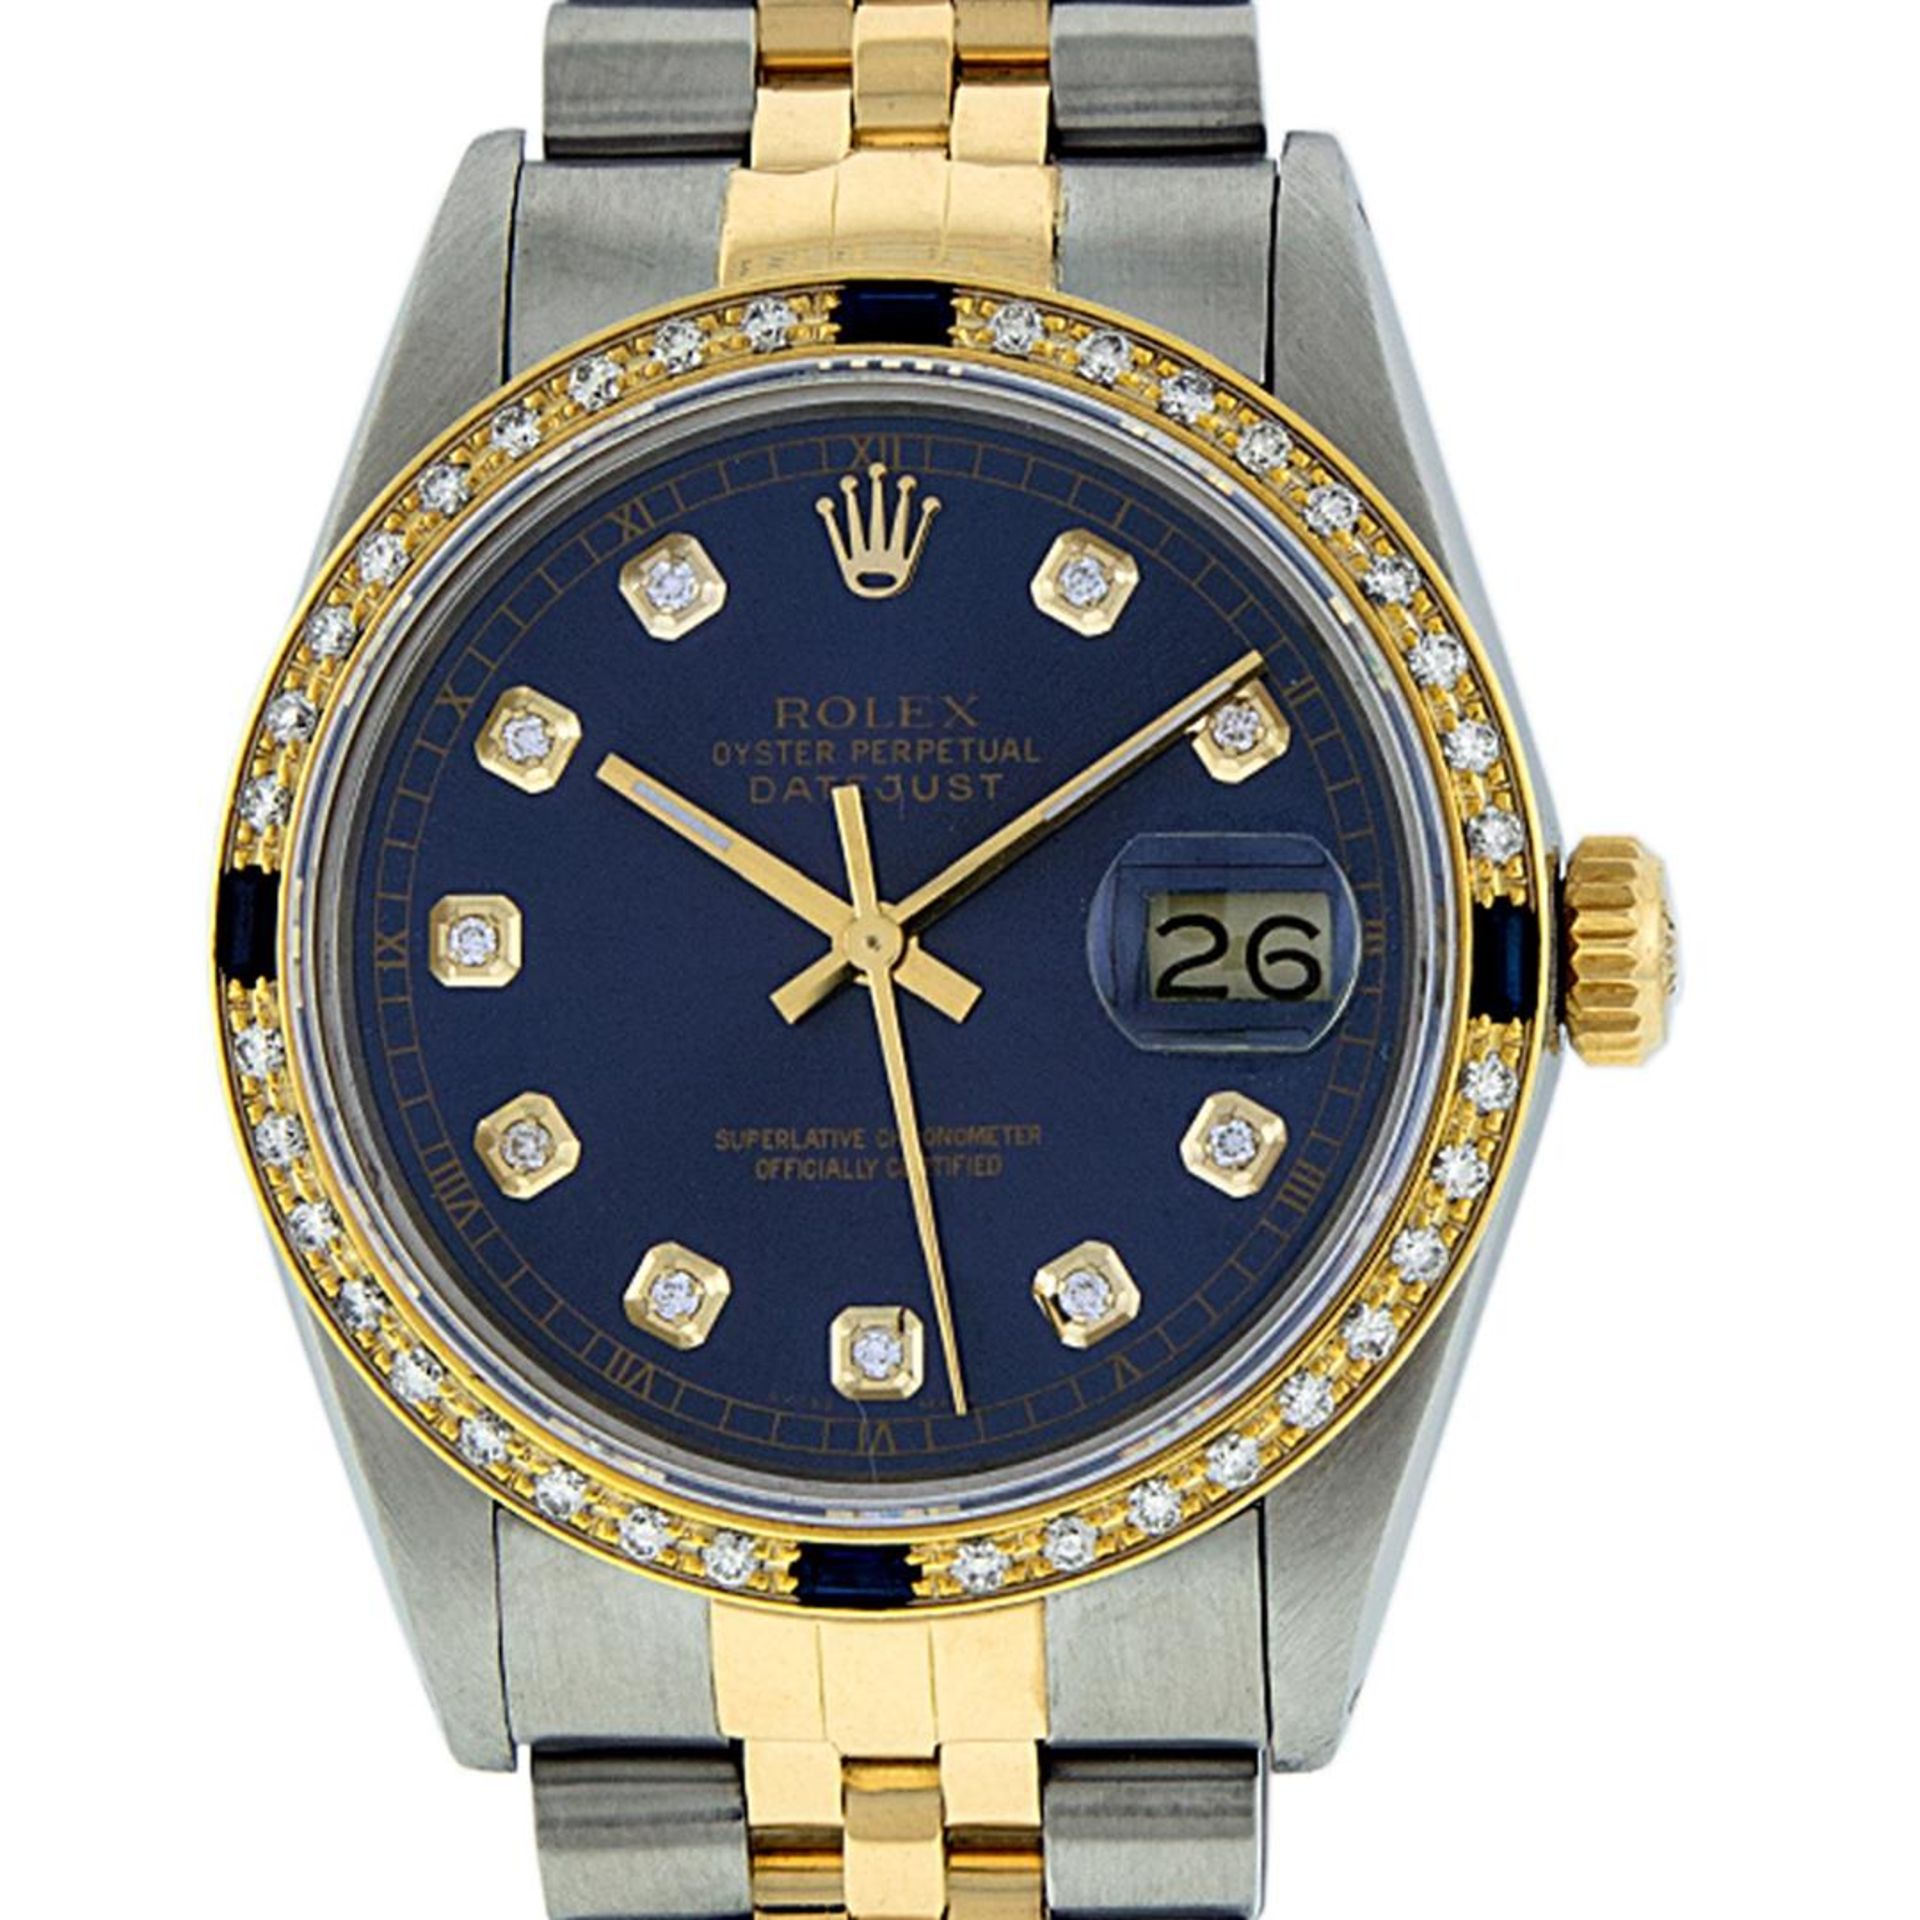 Rolex Mens 2 Tone Blue Diamond & Sapphire Oyster Perpetual Datejust Wriswatch 36 - Image 3 of 9